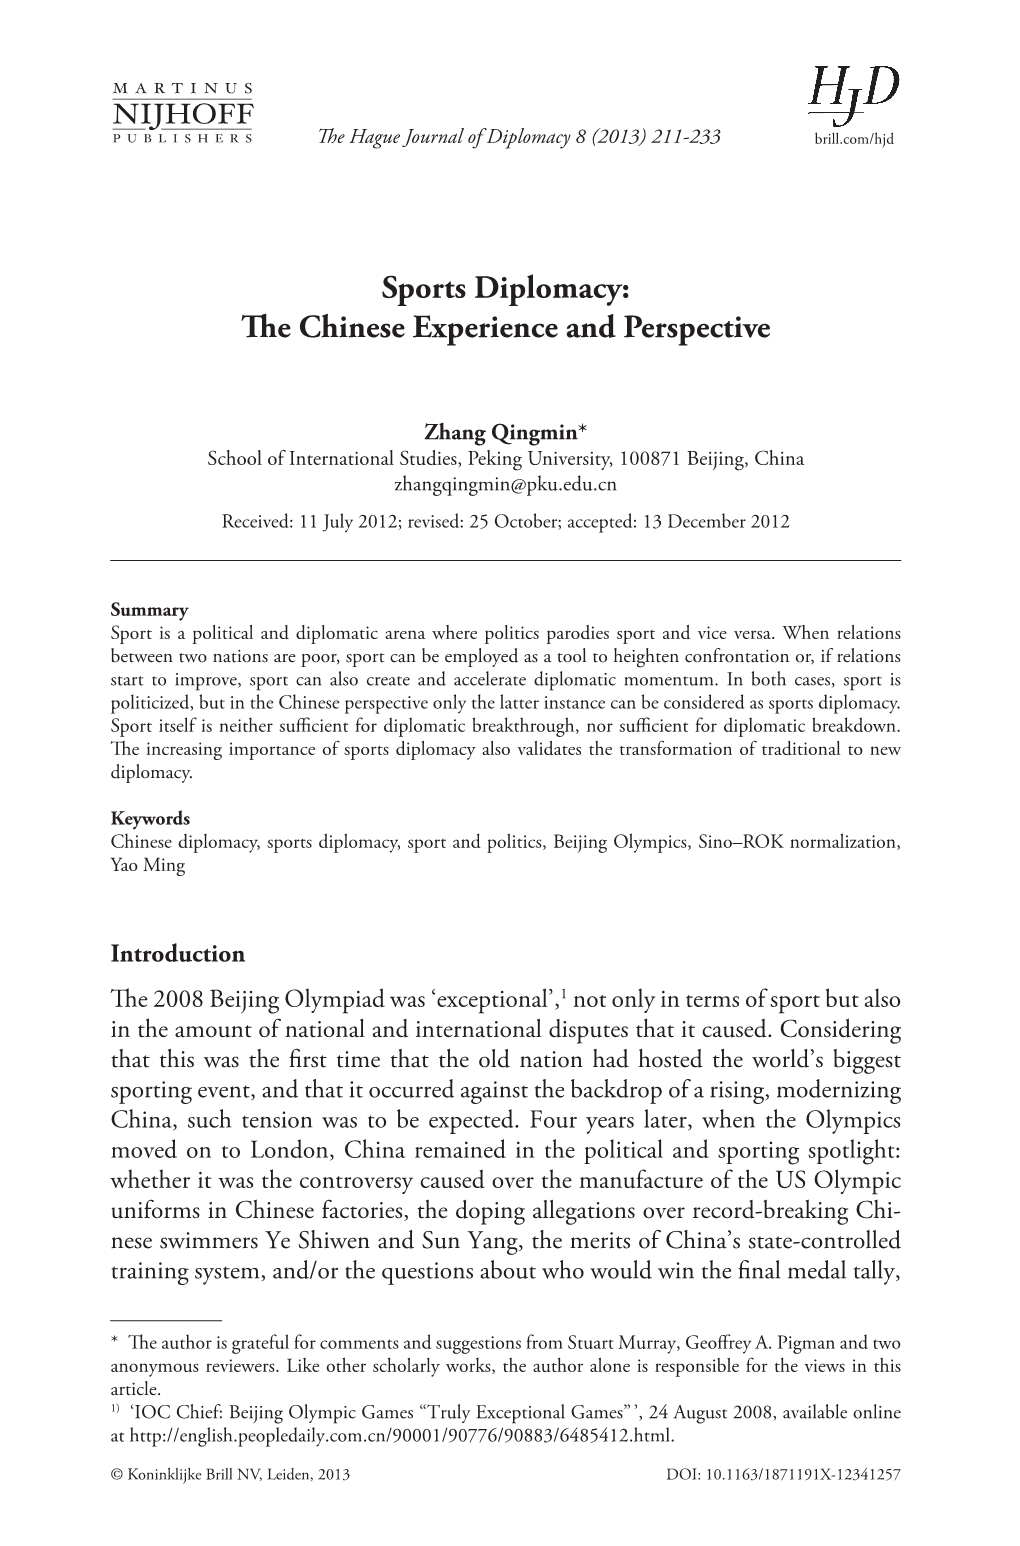 Sports Diplomacy: the Chinese Experience and Perspective